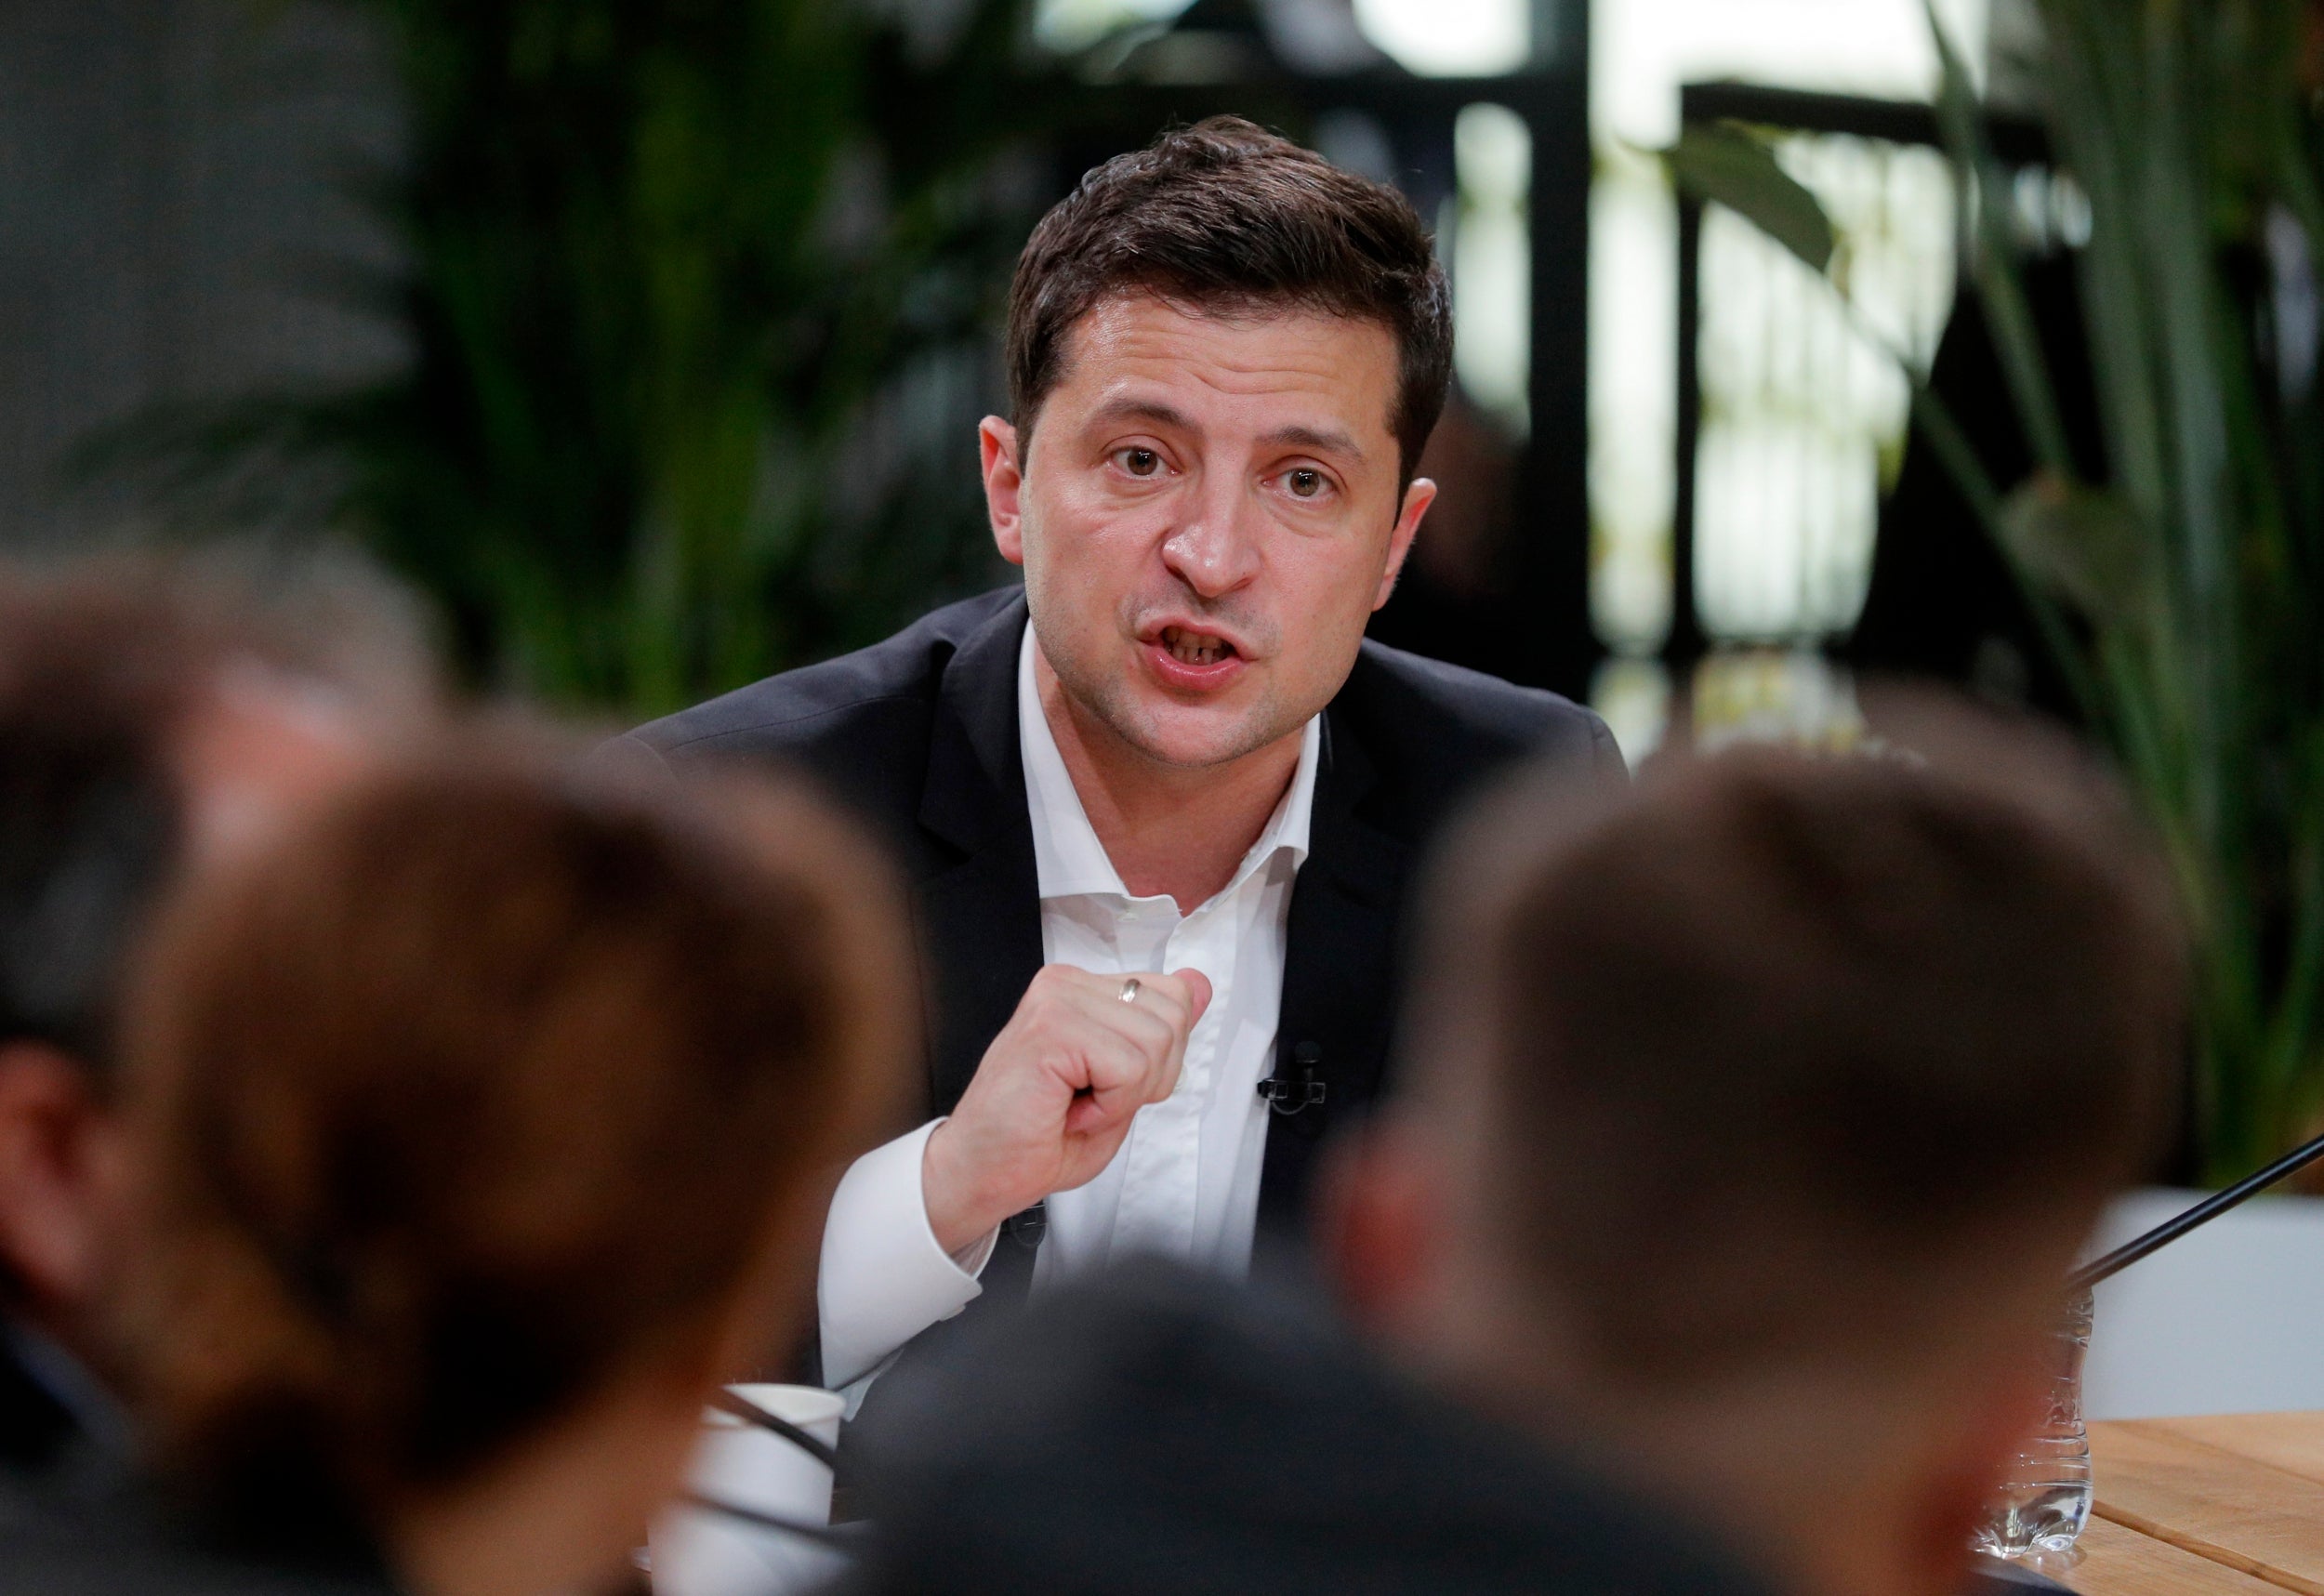 Zelensky made his comments during a marathon, 10-hour press event